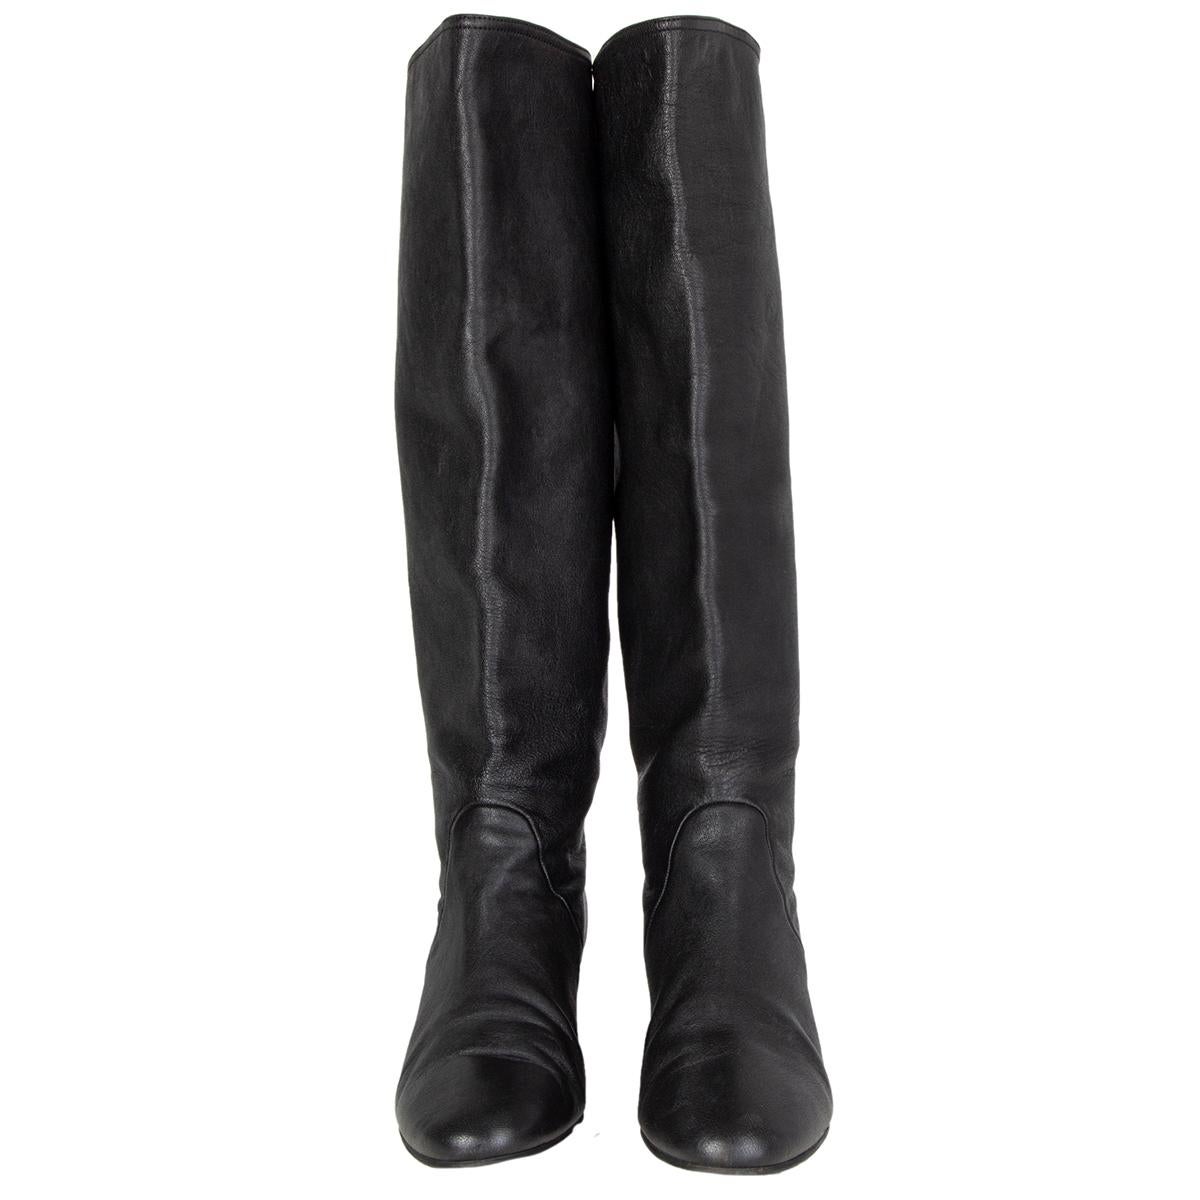 100% authentic Lanvin knee-high round-toe boots in black lambskin with hidden wedge heel. Have been worn and are in excellent condition. Rubber sole has been added. 

Measurements
Imprinted Size	39.5
Shoe Size	39.5
Inside Sole	26.5cm